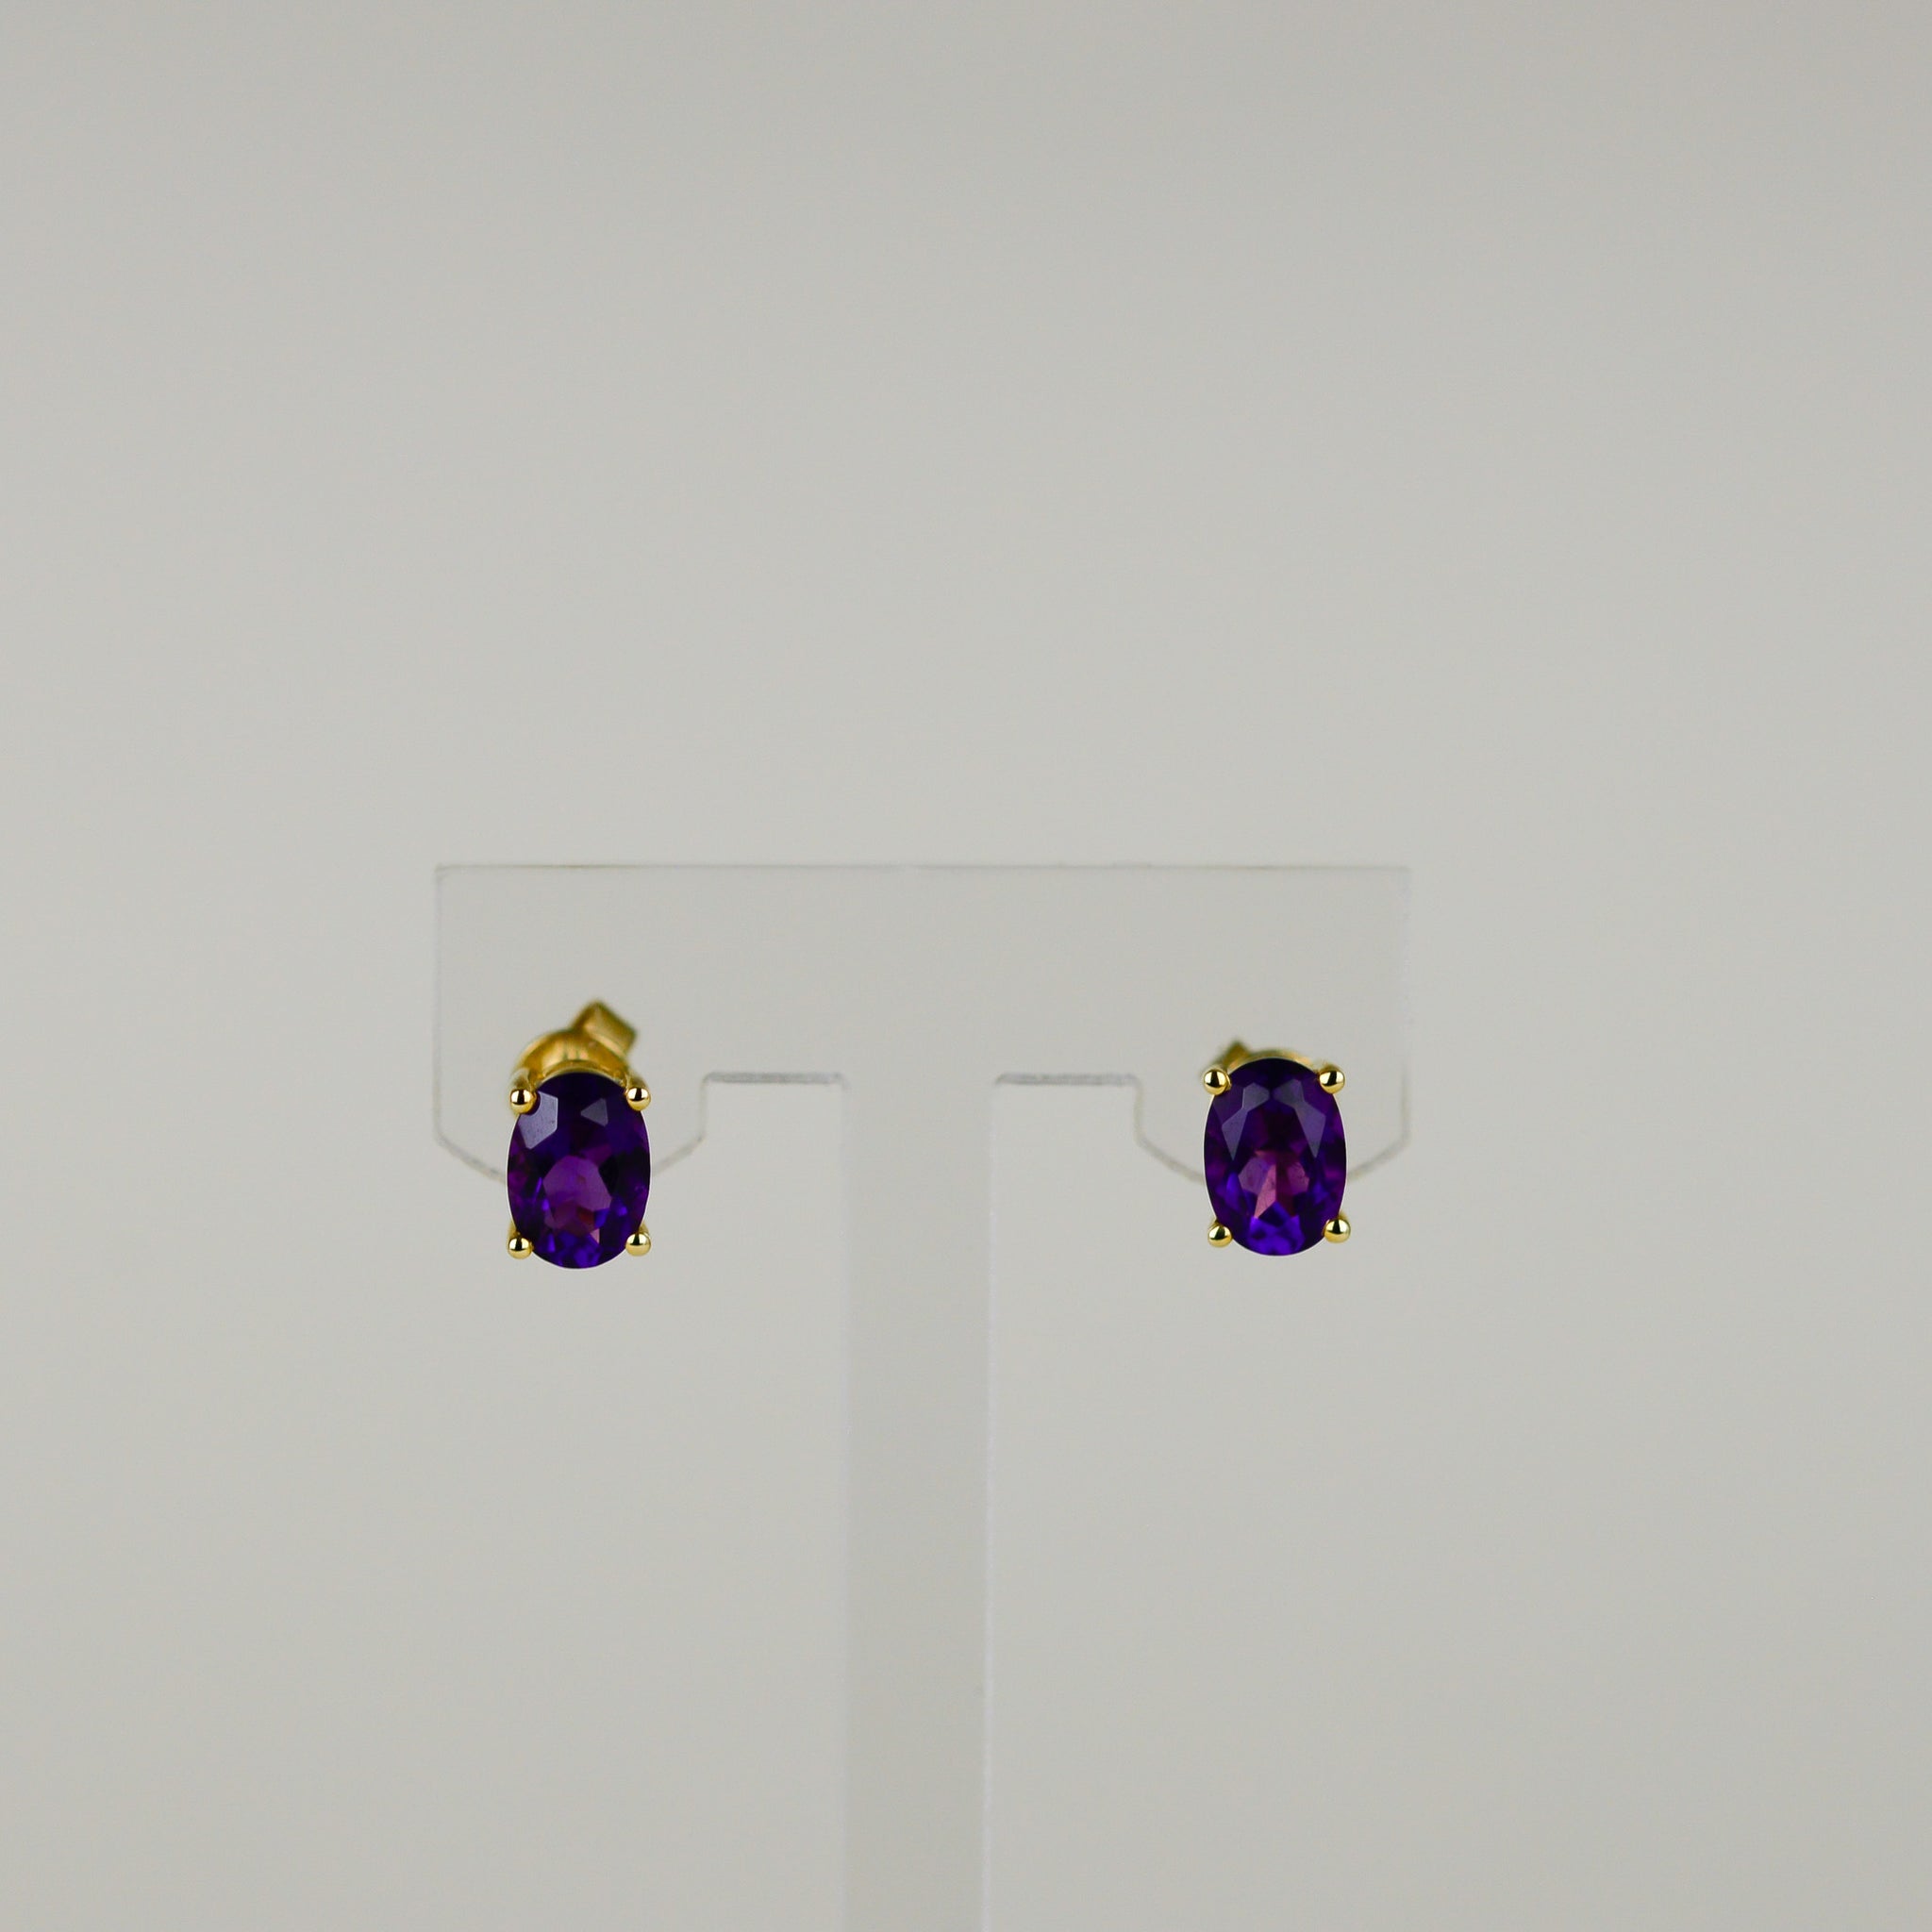 9ct Yellow Gold 1.59ct Oval Amethyst Stud Earrings